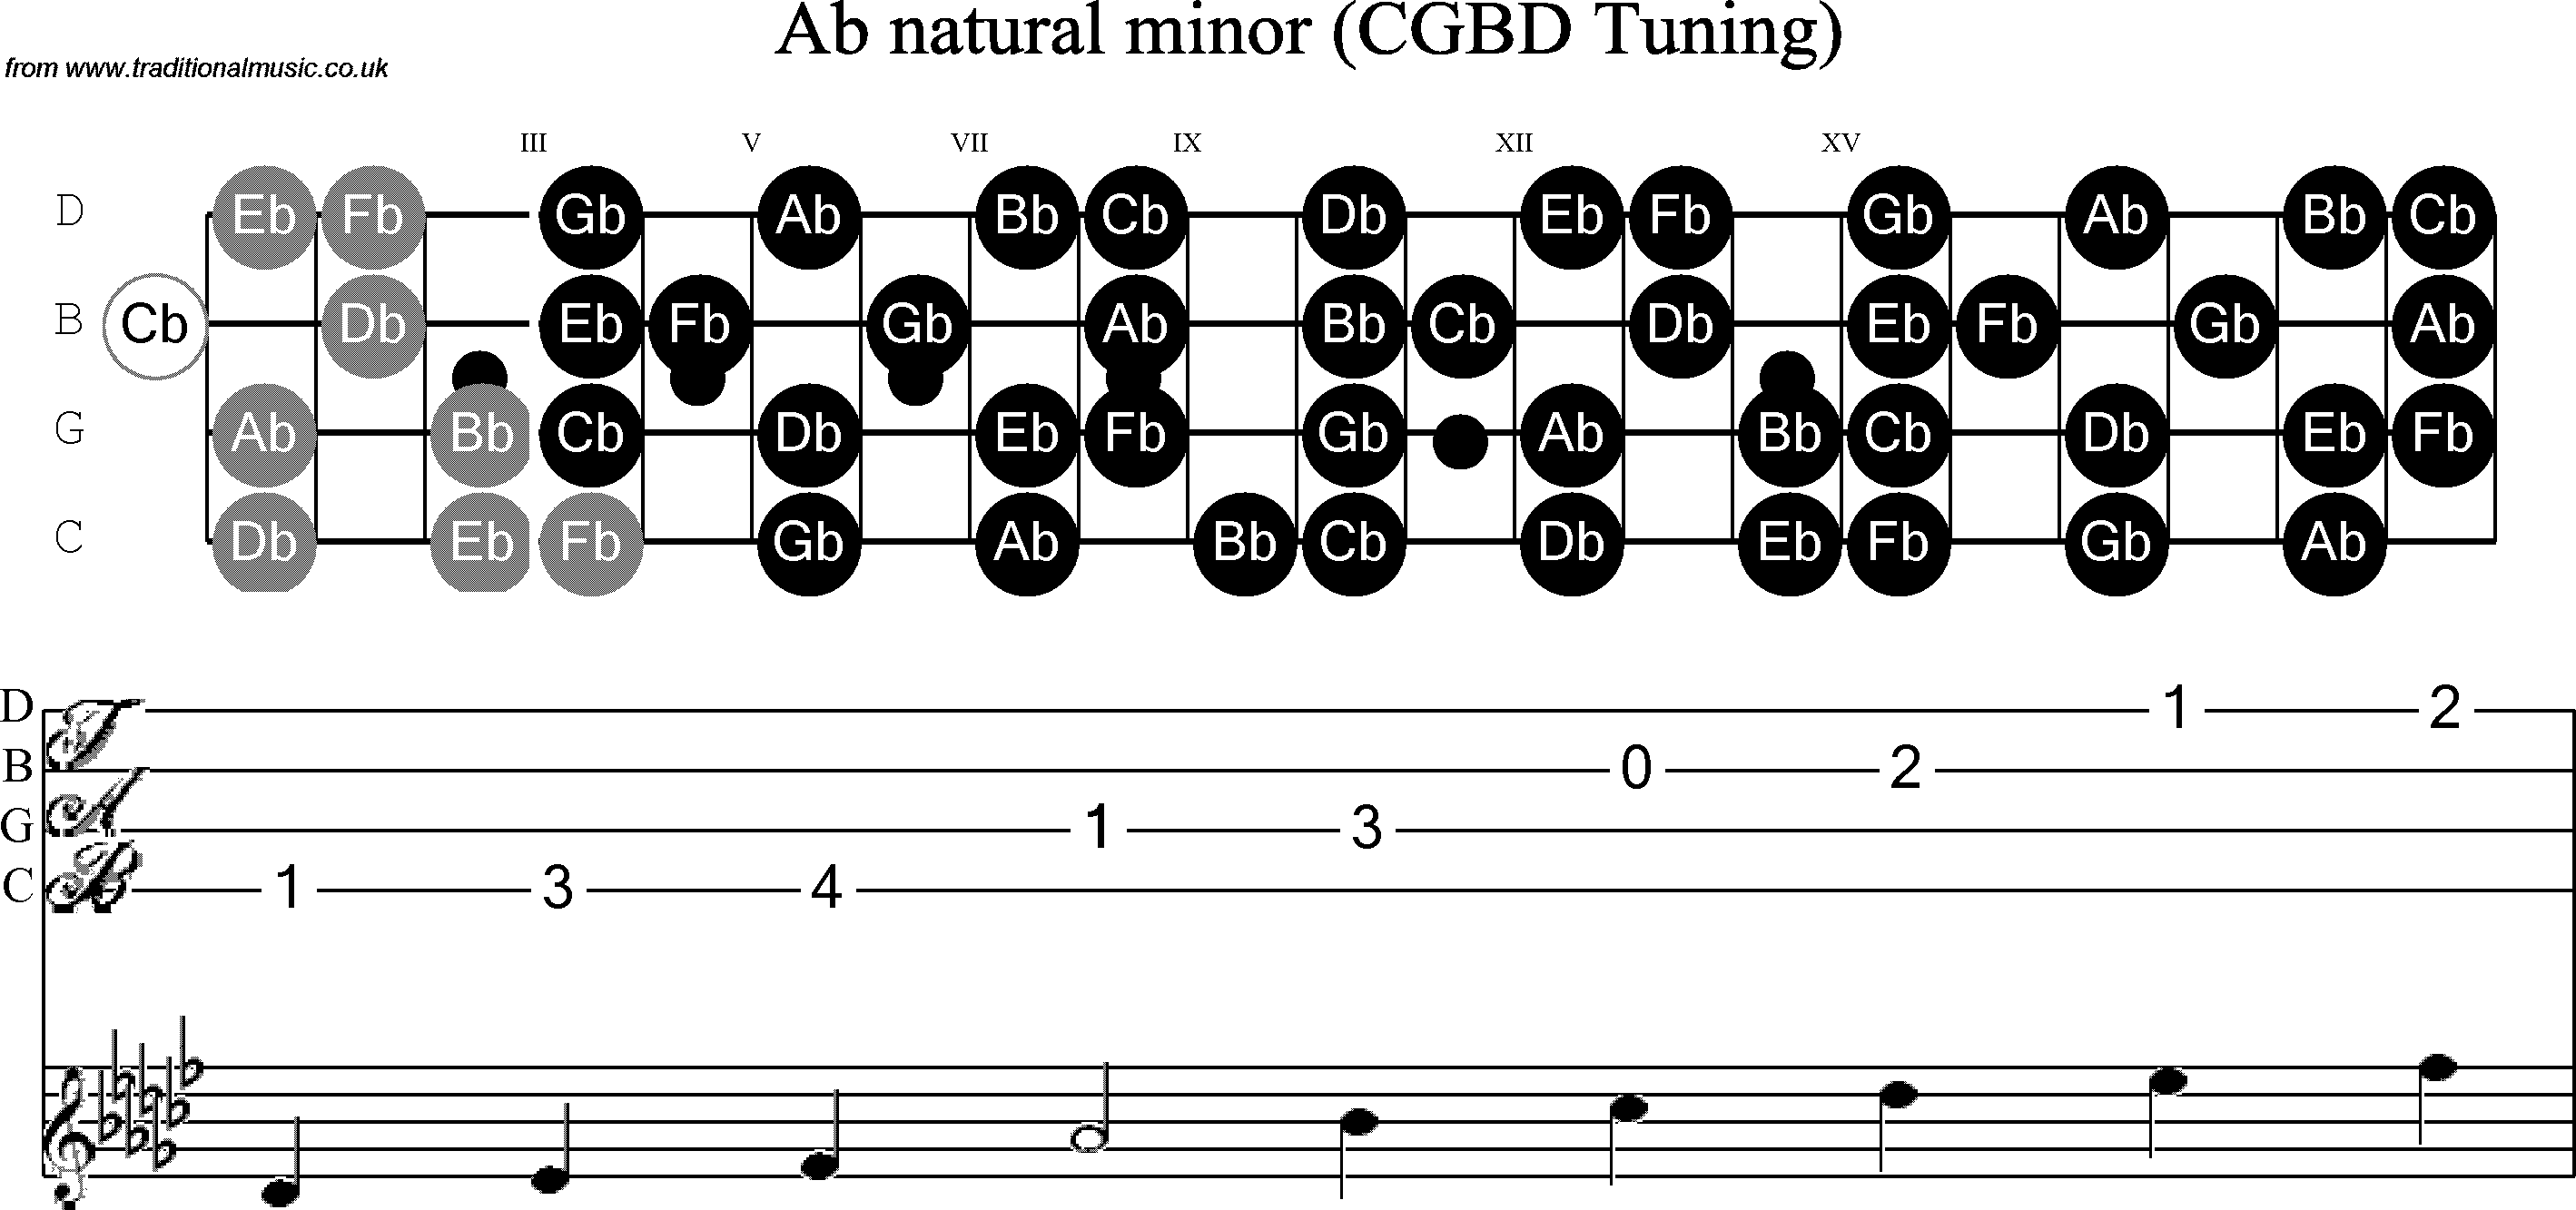 Scale, stave and neck diagram for Banjo(C / plectrunm tuned) Ab Minor